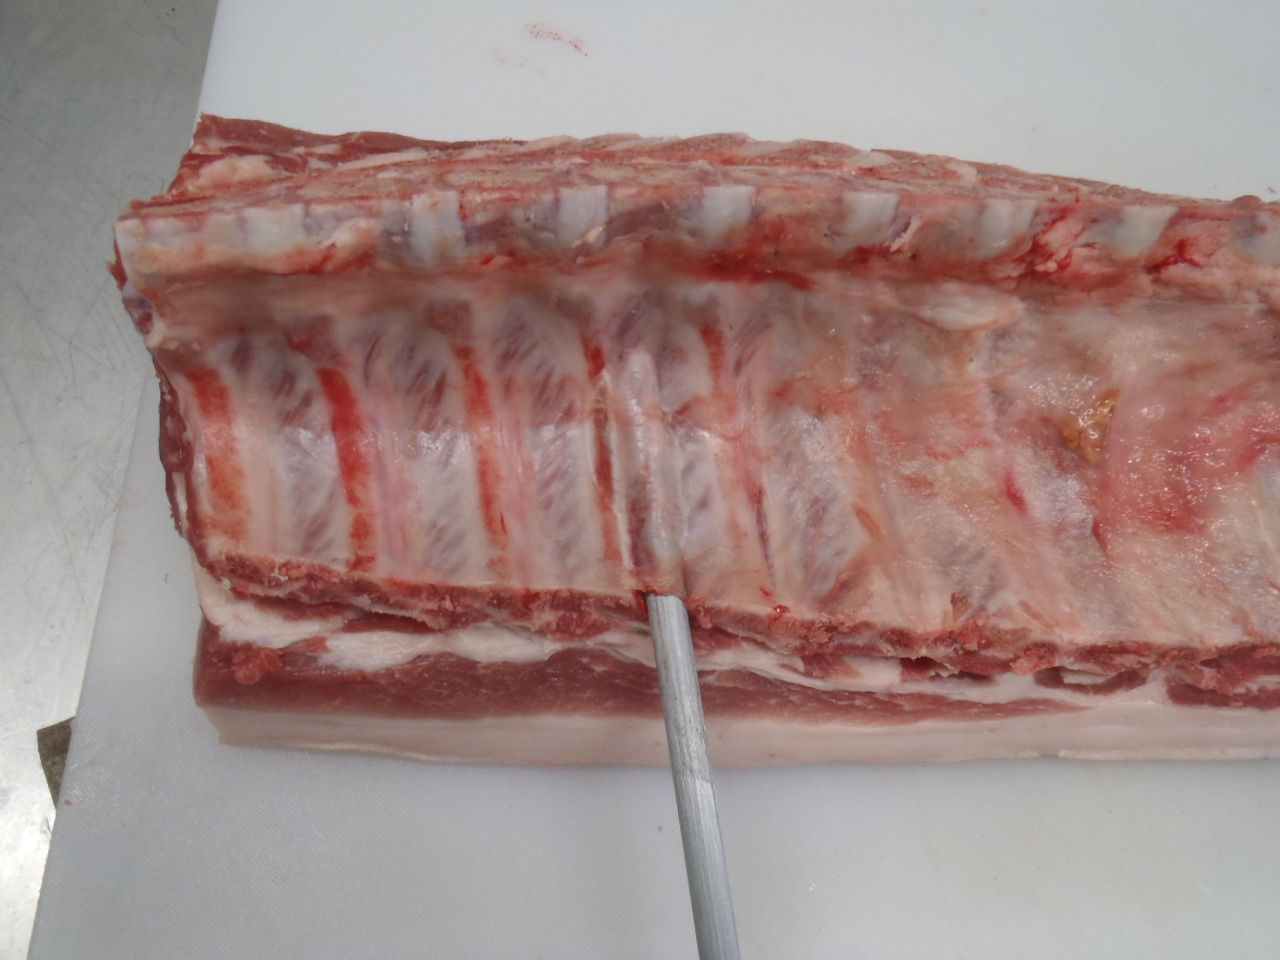 Removing the membrane from the back ribs